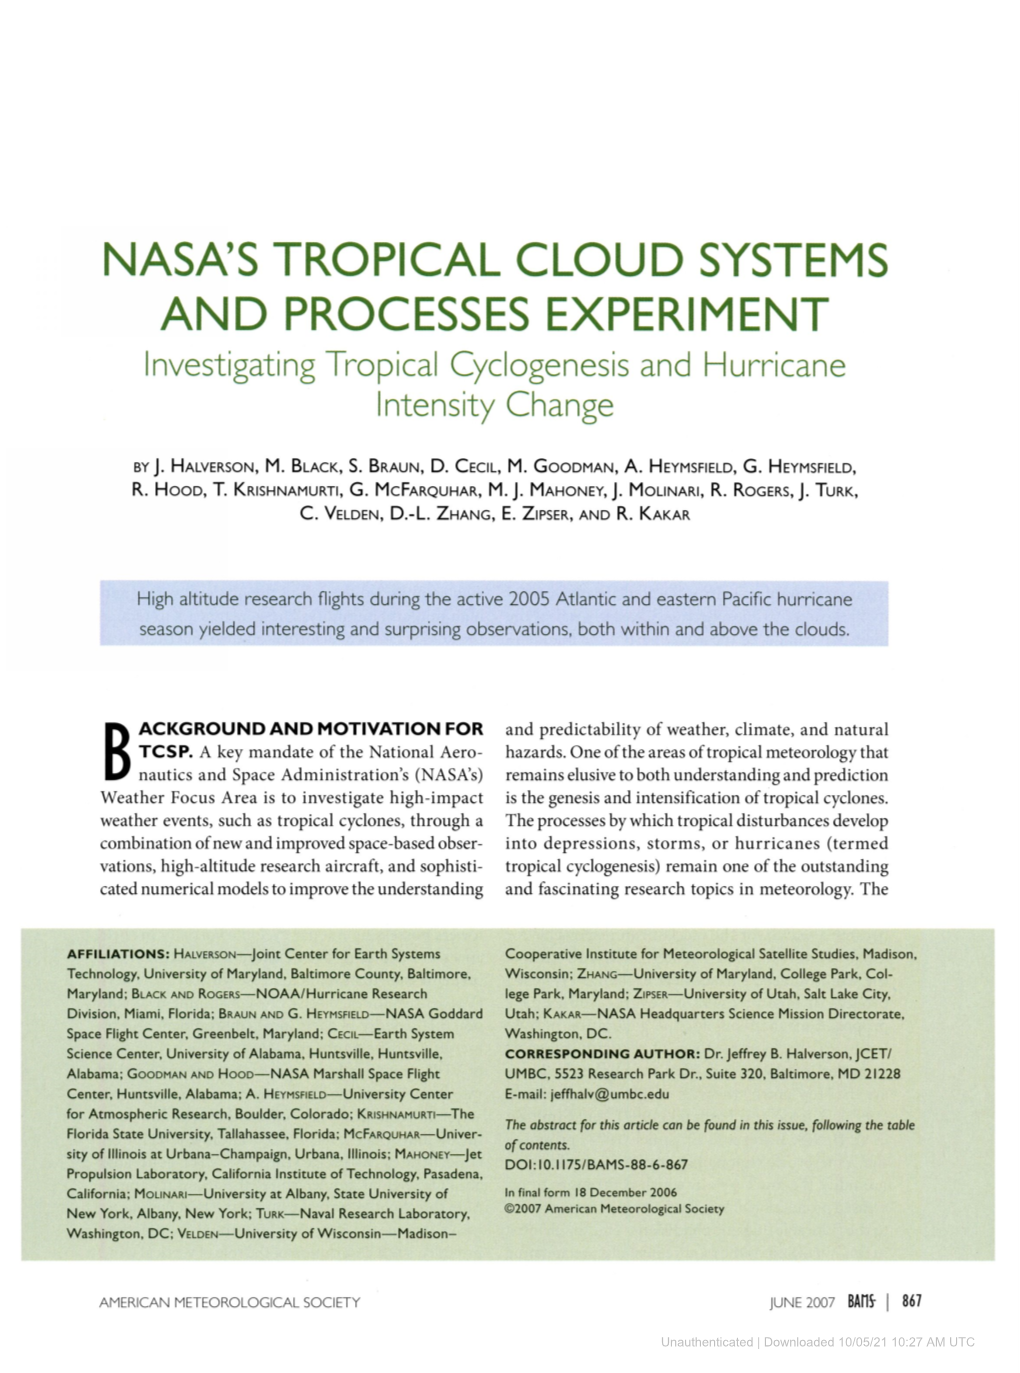 NASA's TROPICAL CLOUD SYSTEMS and PROCESSES EXPERIMENT Investigating Tropical Cyclogenesis and Hurricane Intensity Change